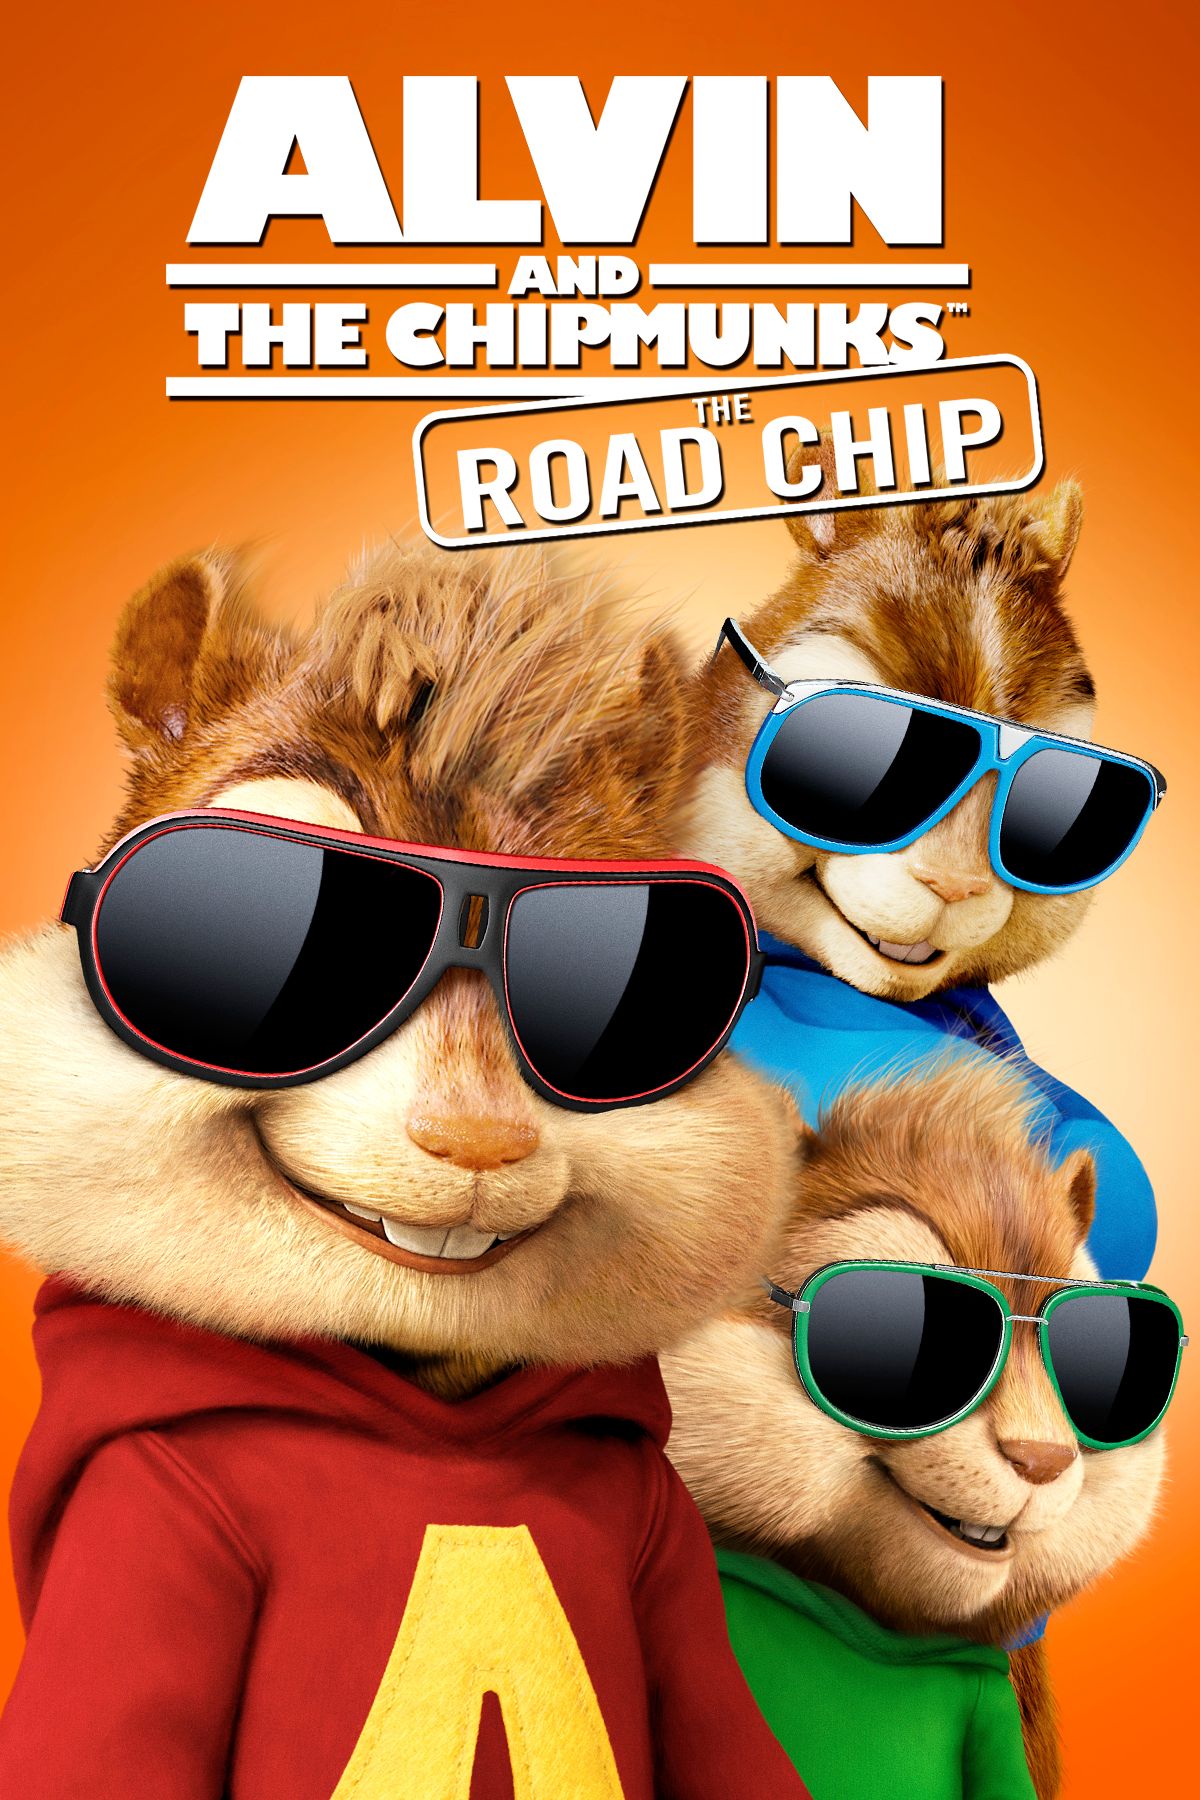 alvin and the chipmunks the squeakquel full movie mp4